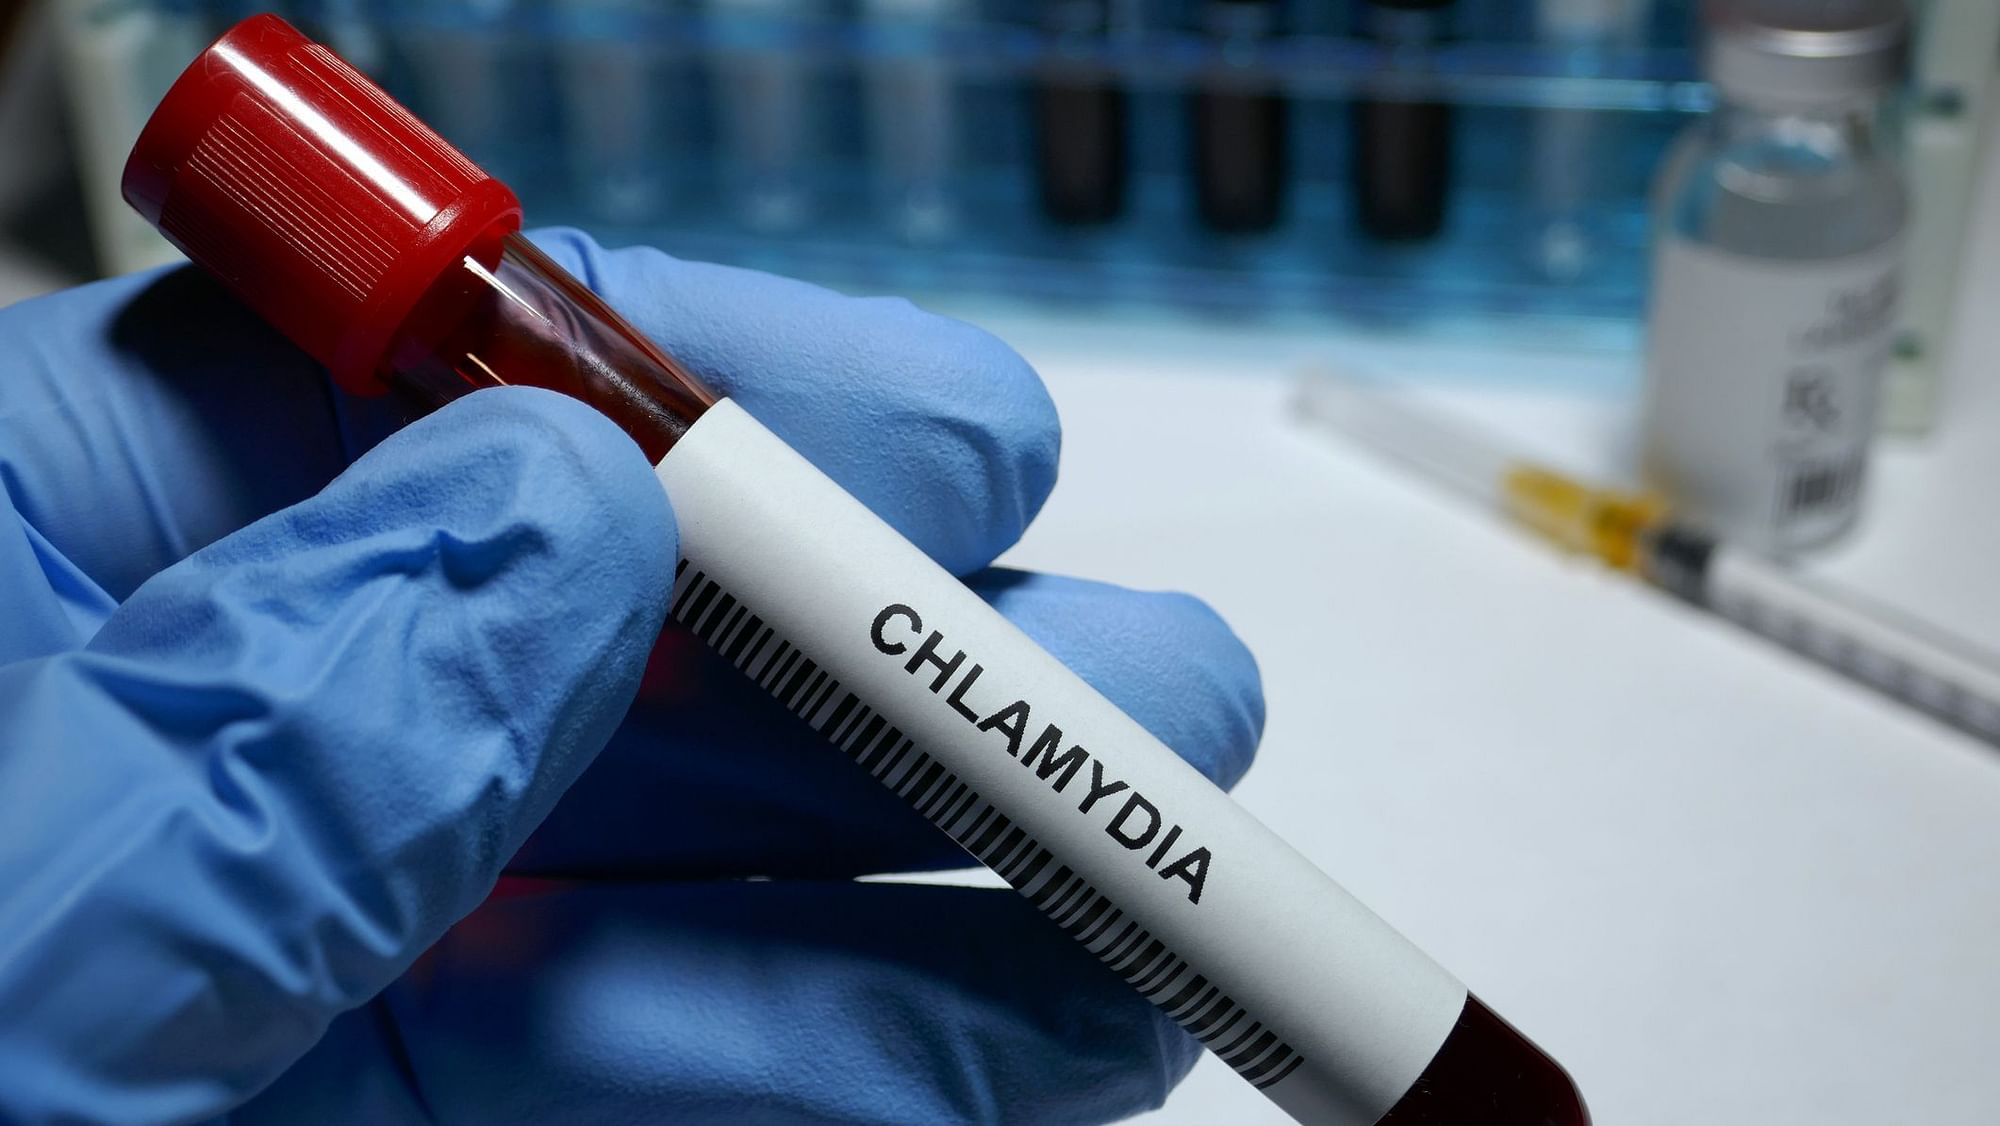 First chlamydia vaccine encouragingly triggered an immune response in women.